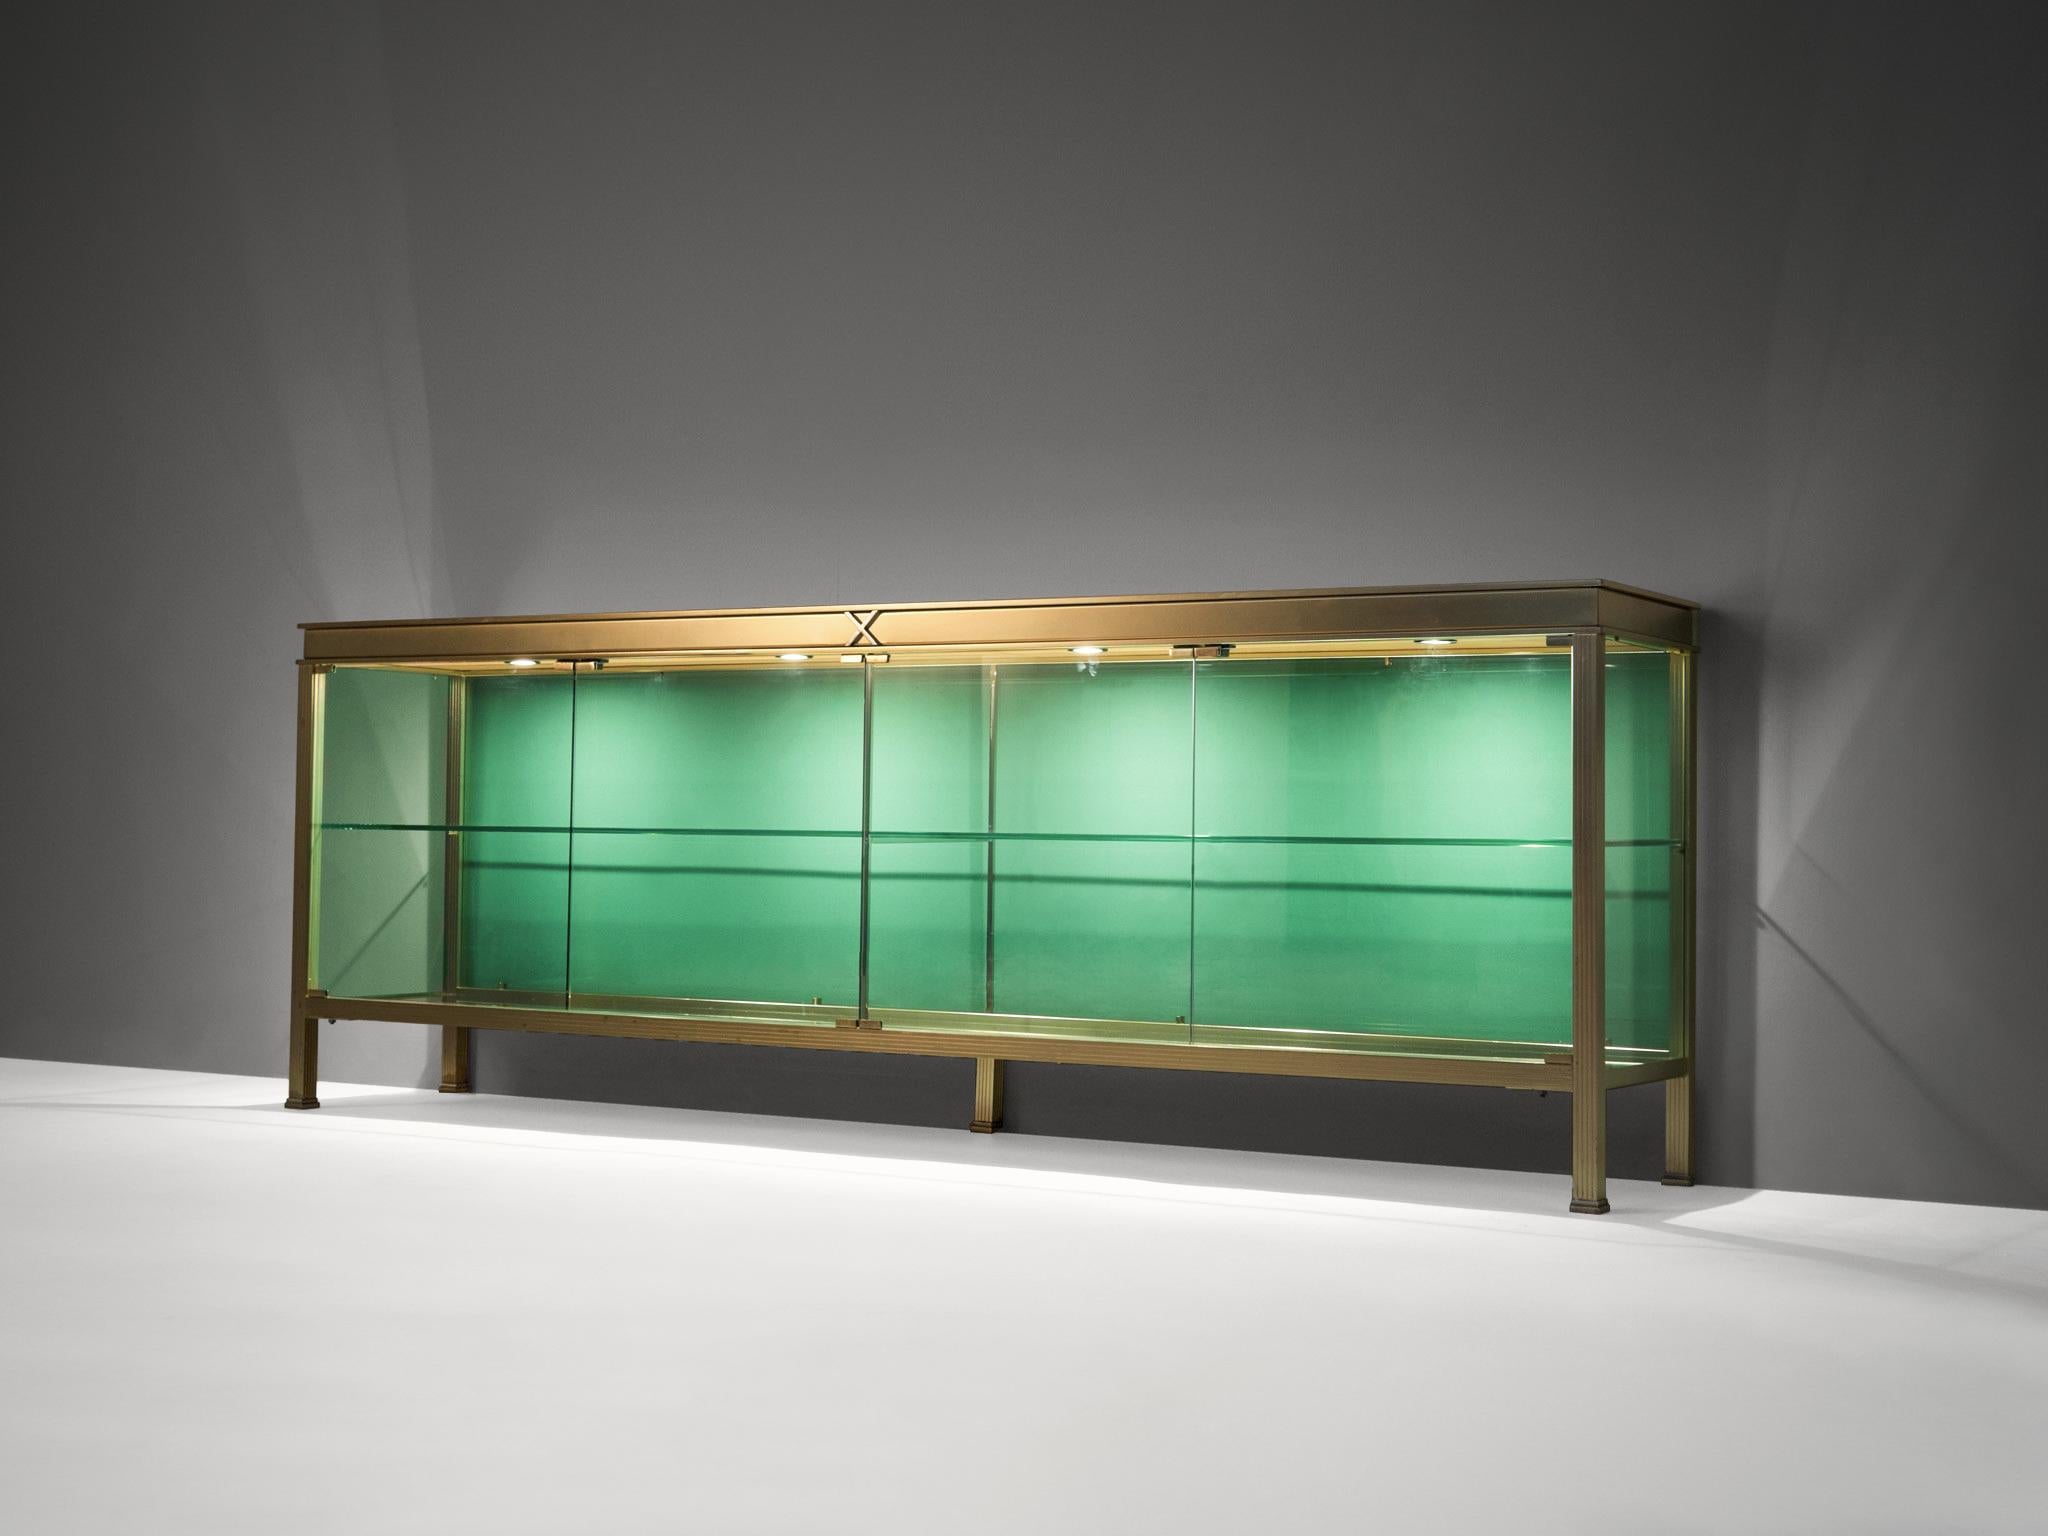 Vitrine, brass, metal, glass, Italy, 1960s. 

This luxurious 'aquarium' vitrine is made of brass and the two sliding doors are executed in colored green glass. Its open construction provides a fragile yet elegant and open look. Illuminated with